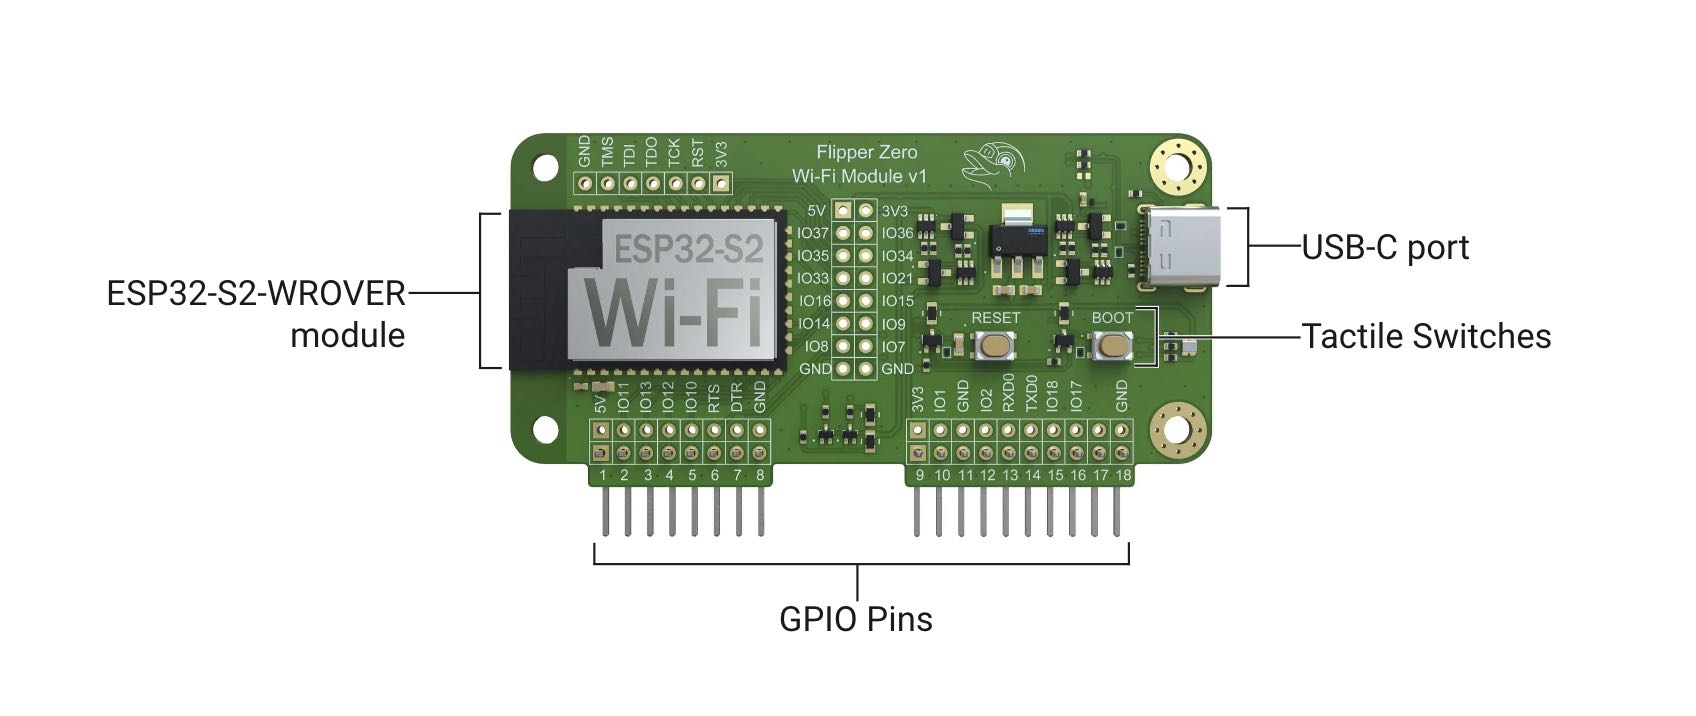 Game Over Flipper Zero Wifi GPIO Module from ruckus // section80 on Tindie